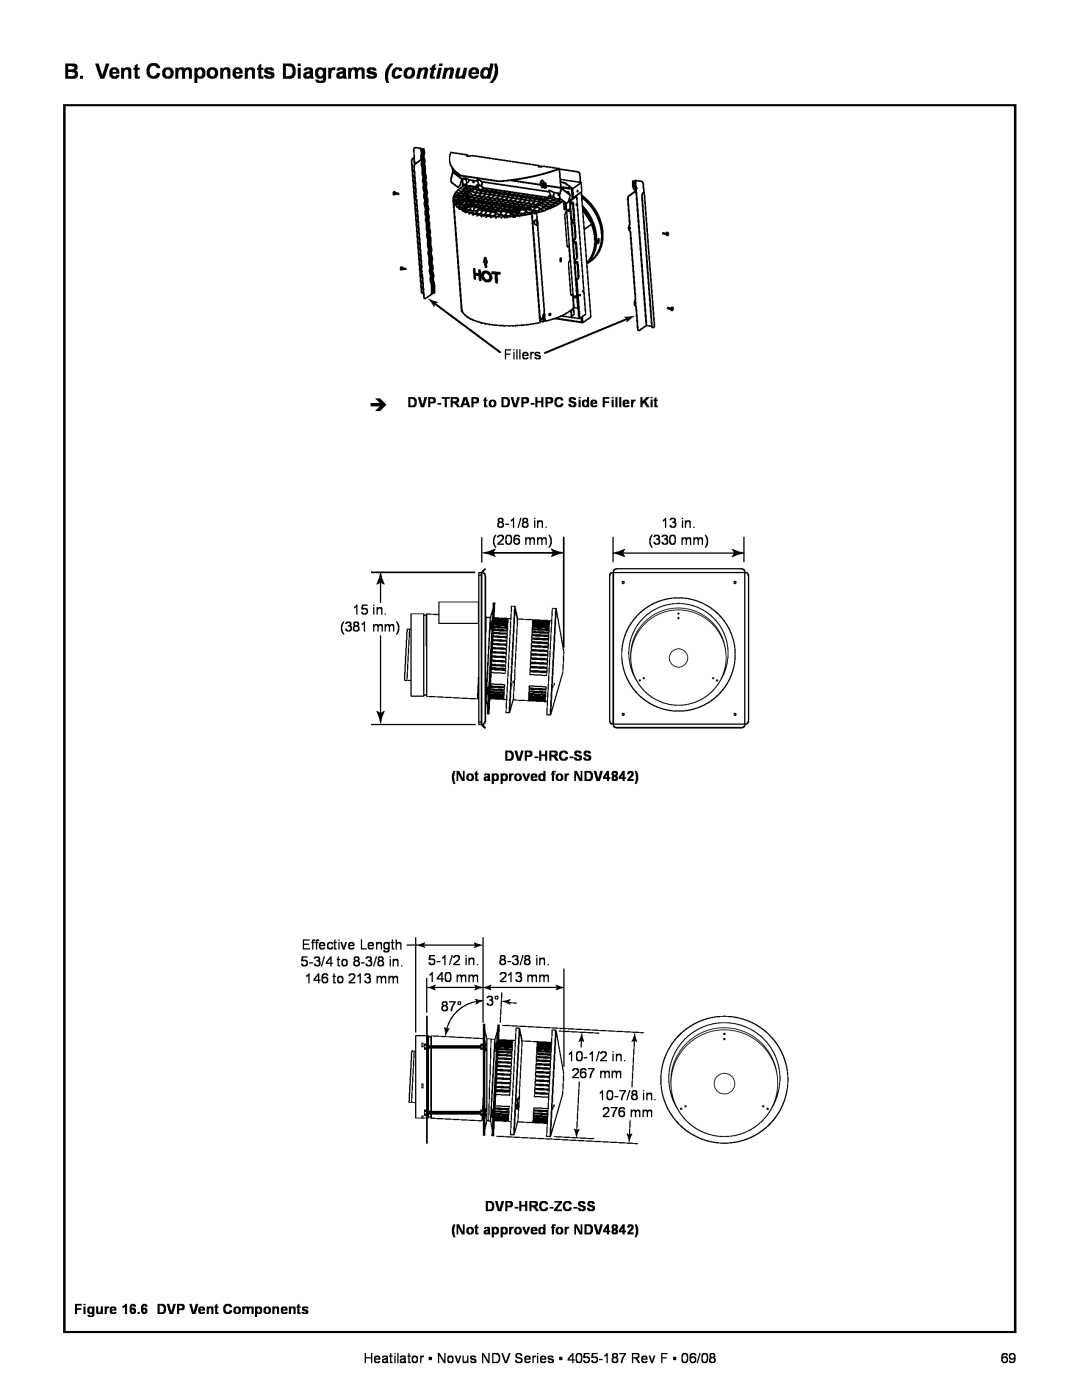 Hearth and Home Technologies NDV3933, NDV3630 B. Vent Components Diagrams continued, Î DVP-TRAP to DVP-HPC Side Filler Kit 